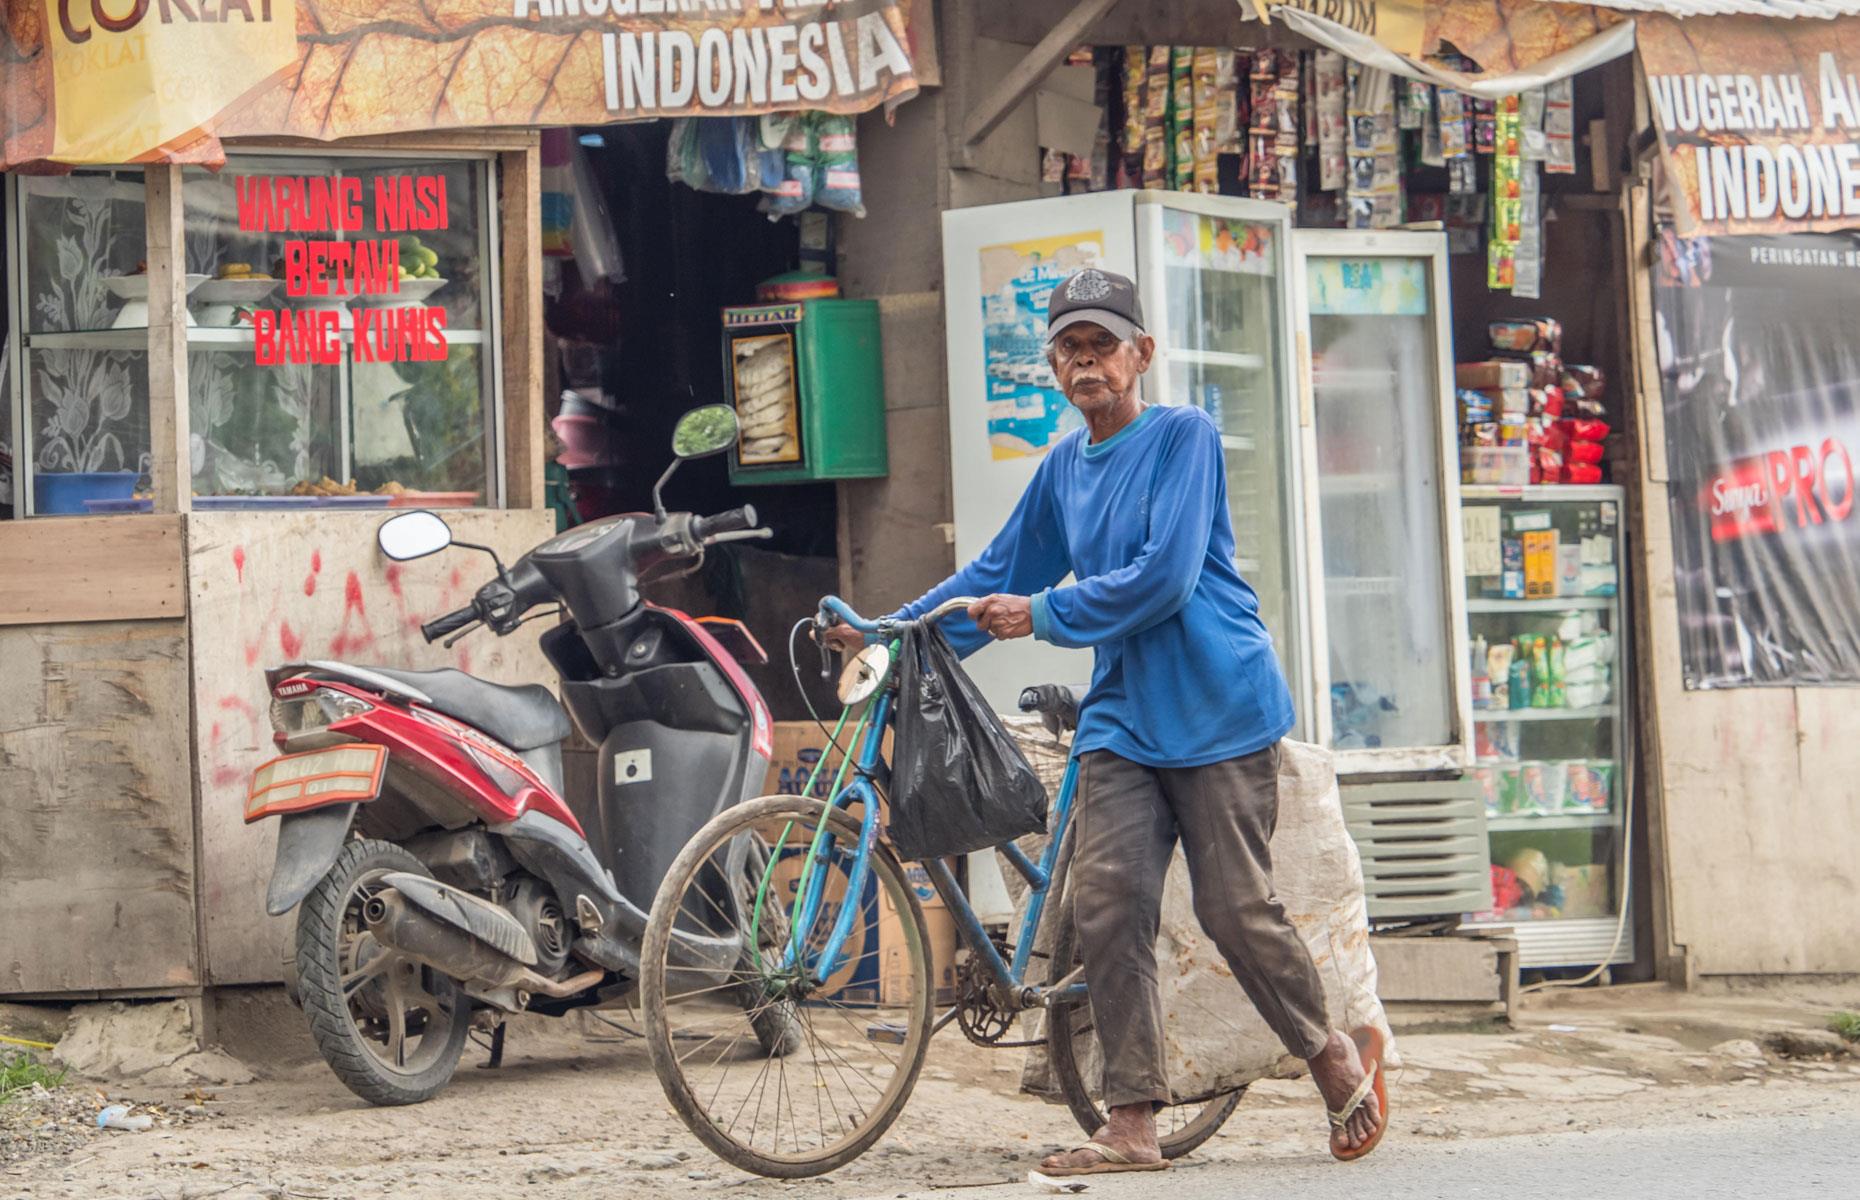 <p>Indonesia's life expectancy has advanced in leaps and bounds since 1950 when it stood at just 39.4. Now pegged at 71.1, the figure is projected to rise to 74.7 in 2050.</p>  <p>Nevertheless, Indonesia trails behind upper-middle-income countries in terms of life expectancy, and the nation's healthcare spending per capita is the second-lowest among the 38 OECD countries and five partner nations. In the face of widespread opposition, the country's government passed a healthcare reform bill in 2023 seeking to boost the number of doctors by making it easier for foreign physicians to work in the country. The bill also allows for the private sector to fund public hospitals and contains proposals intended to improve healthcare for ordinary Indonesians.</p>